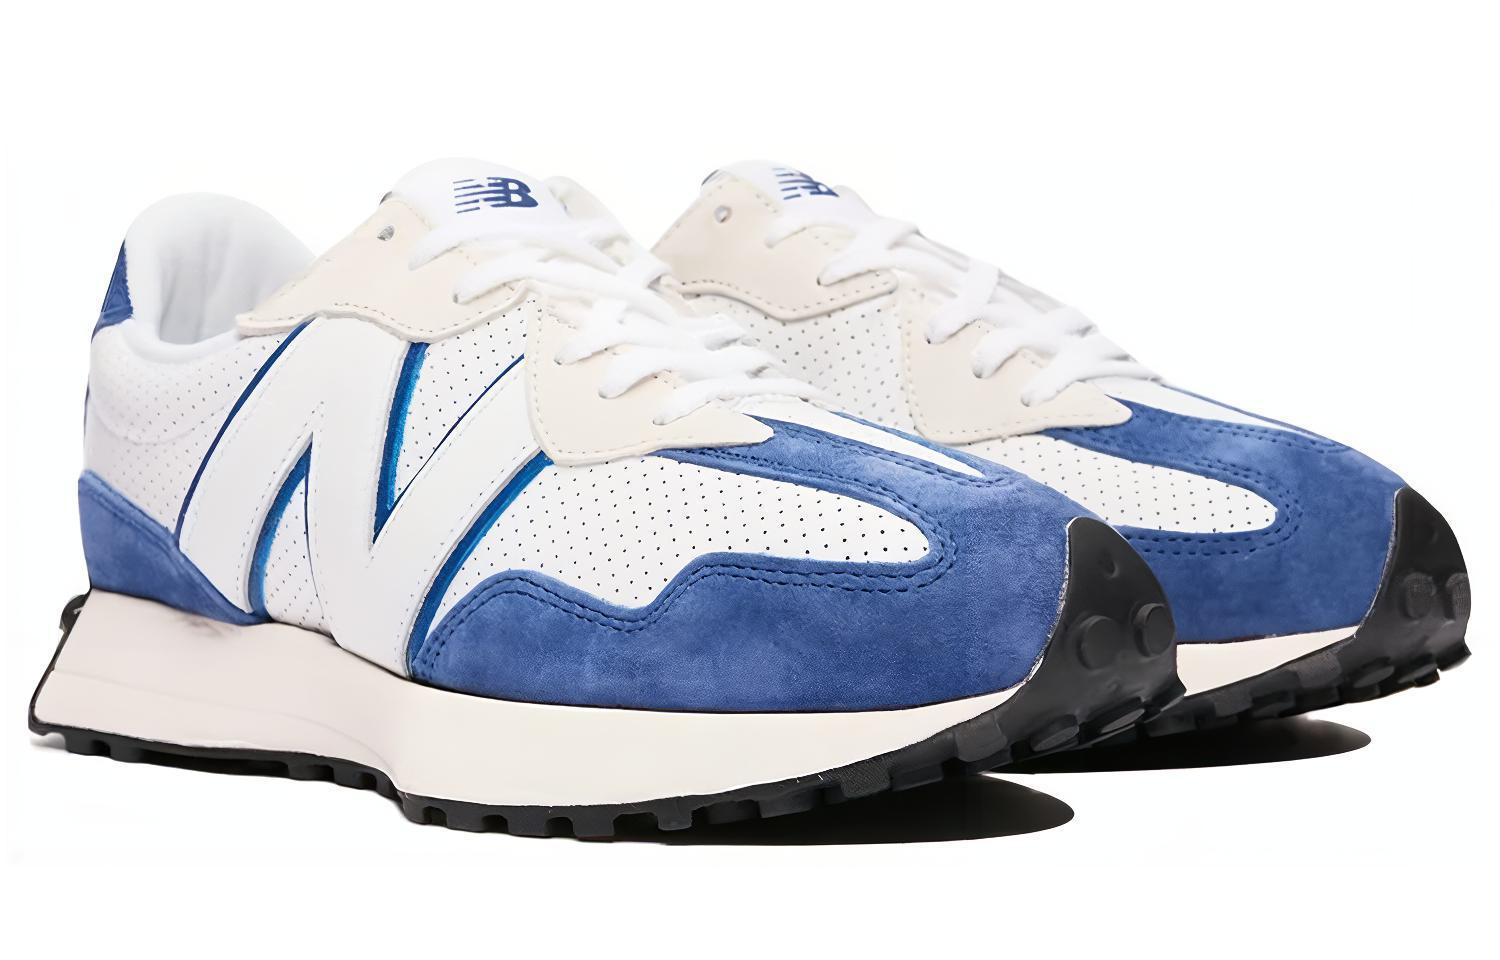 New Balance NB 327 Primary Pack